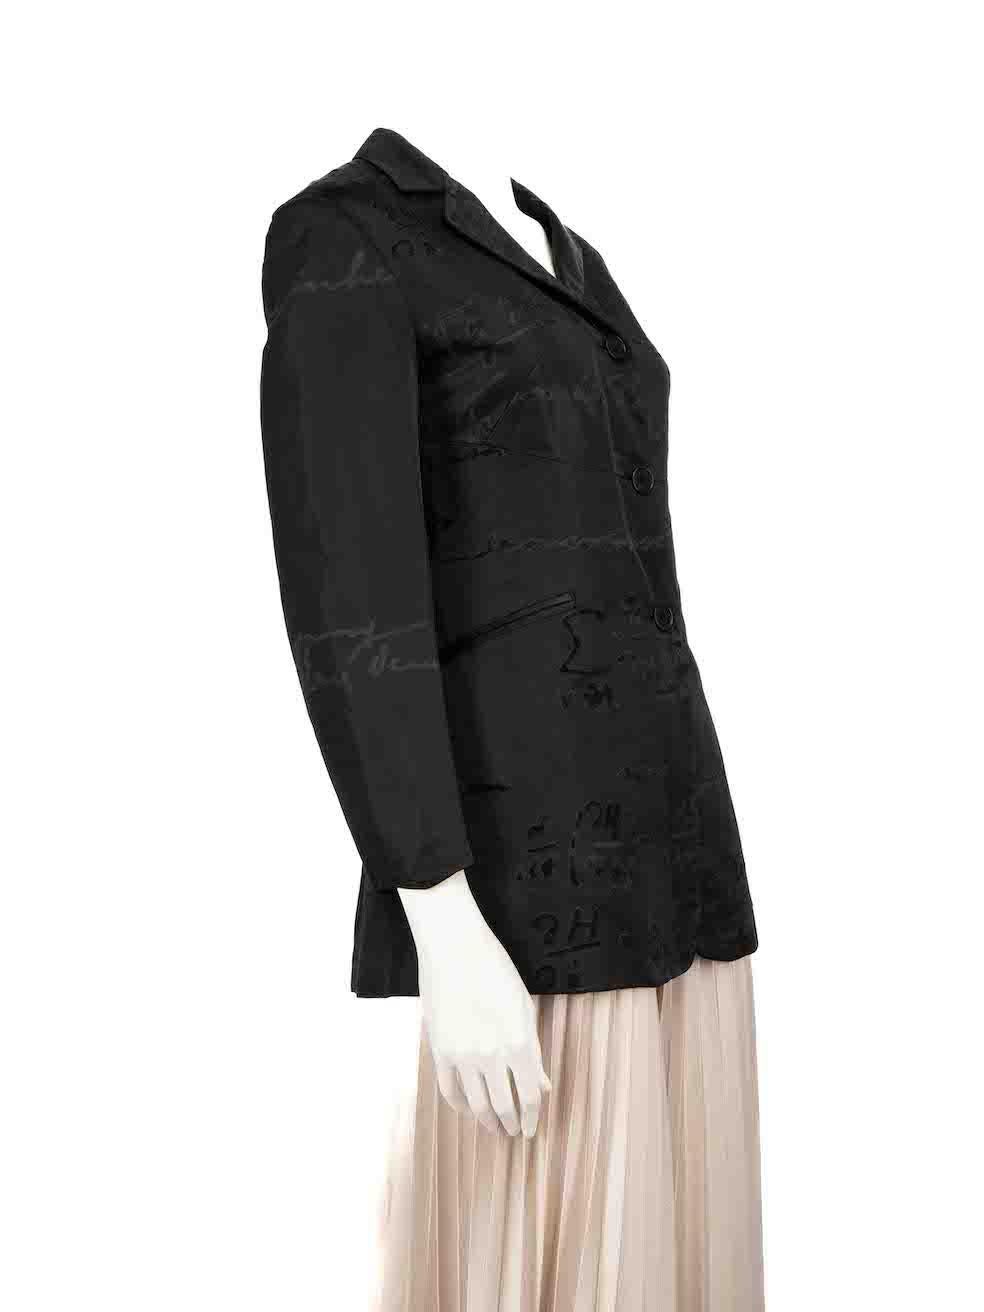 CONDITION is Very good. Minimal wear to the blazer is evident. Minimal wear to the front and back is seen with pulls to the weave and discolouration marks on the back on this used Moschino Cheap And Chic designer resale item.
 
 
 
 Details
 
 
